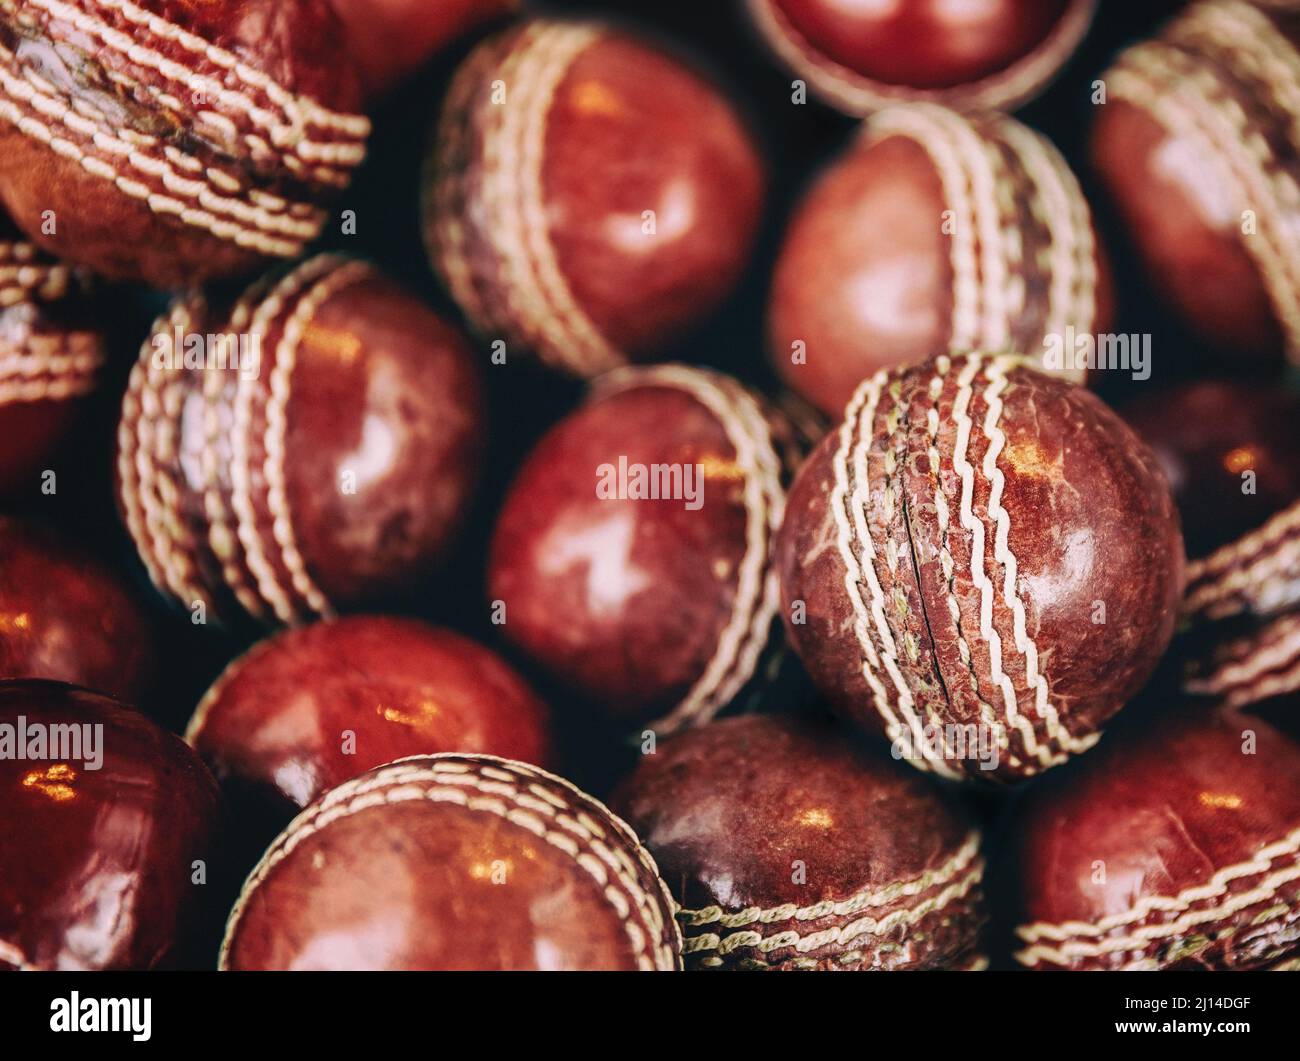 A background of vintage red leather cricket balls with white stitching. Retro style processing. Stock Photo